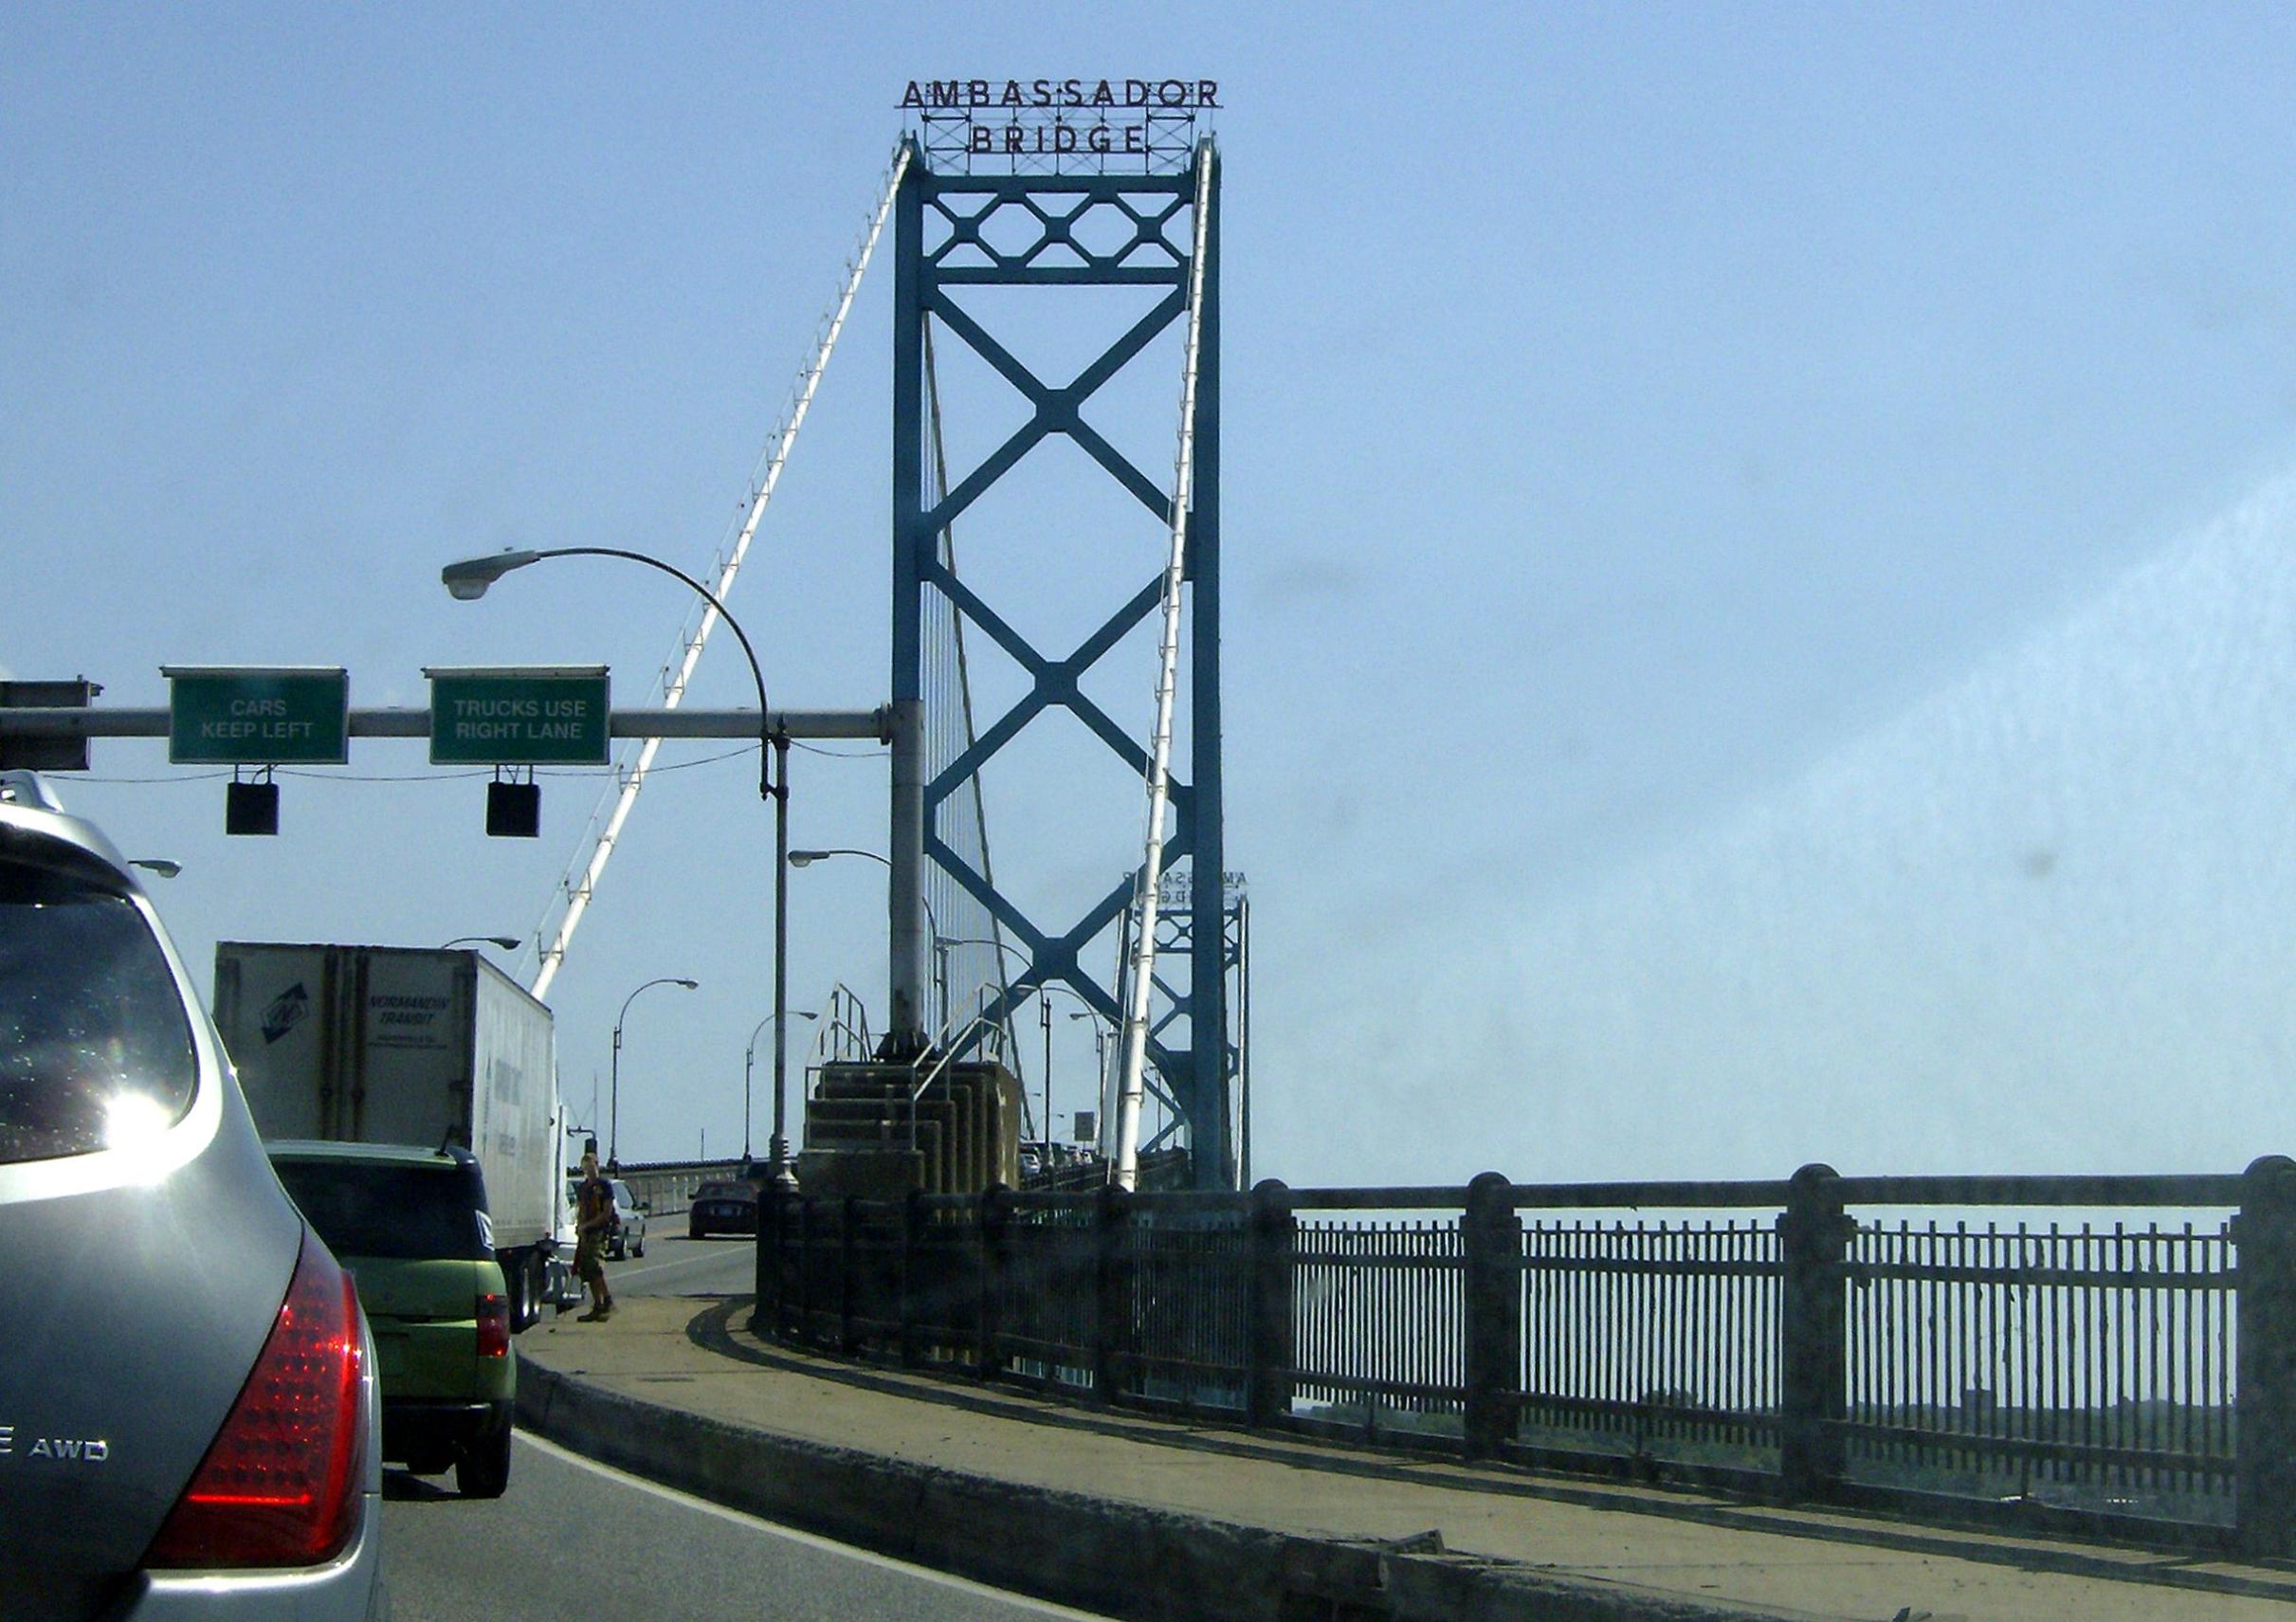 Crossing the bridge into Canada, from the US. This is the Ambassador Bridge